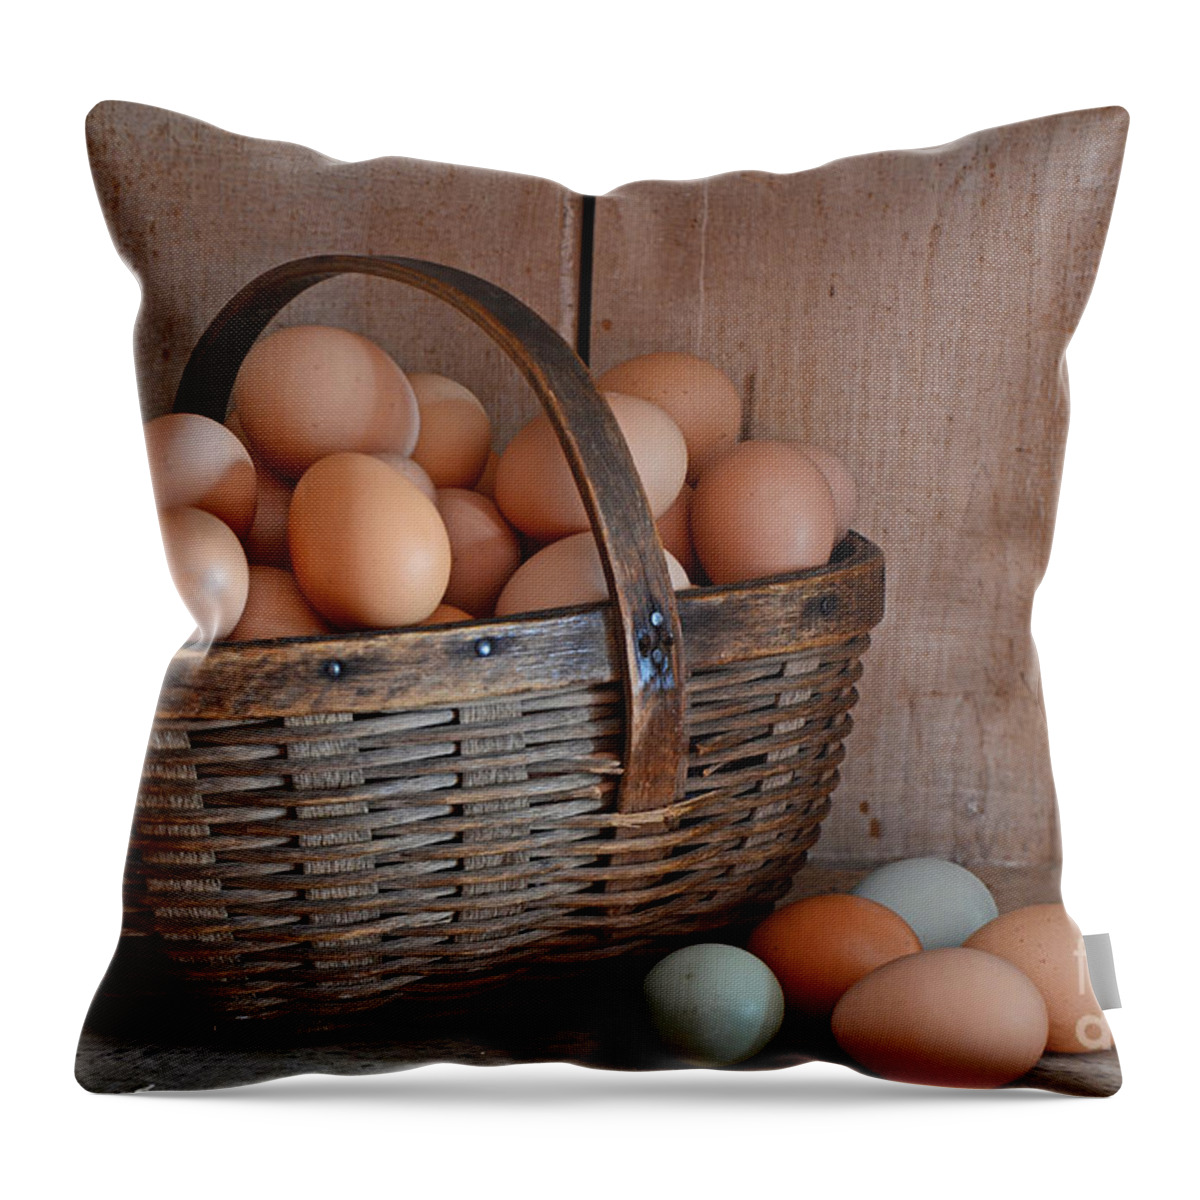 Still Life Throw Pillow featuring the photograph Basket Full Of Eggs by Mary Carol Story